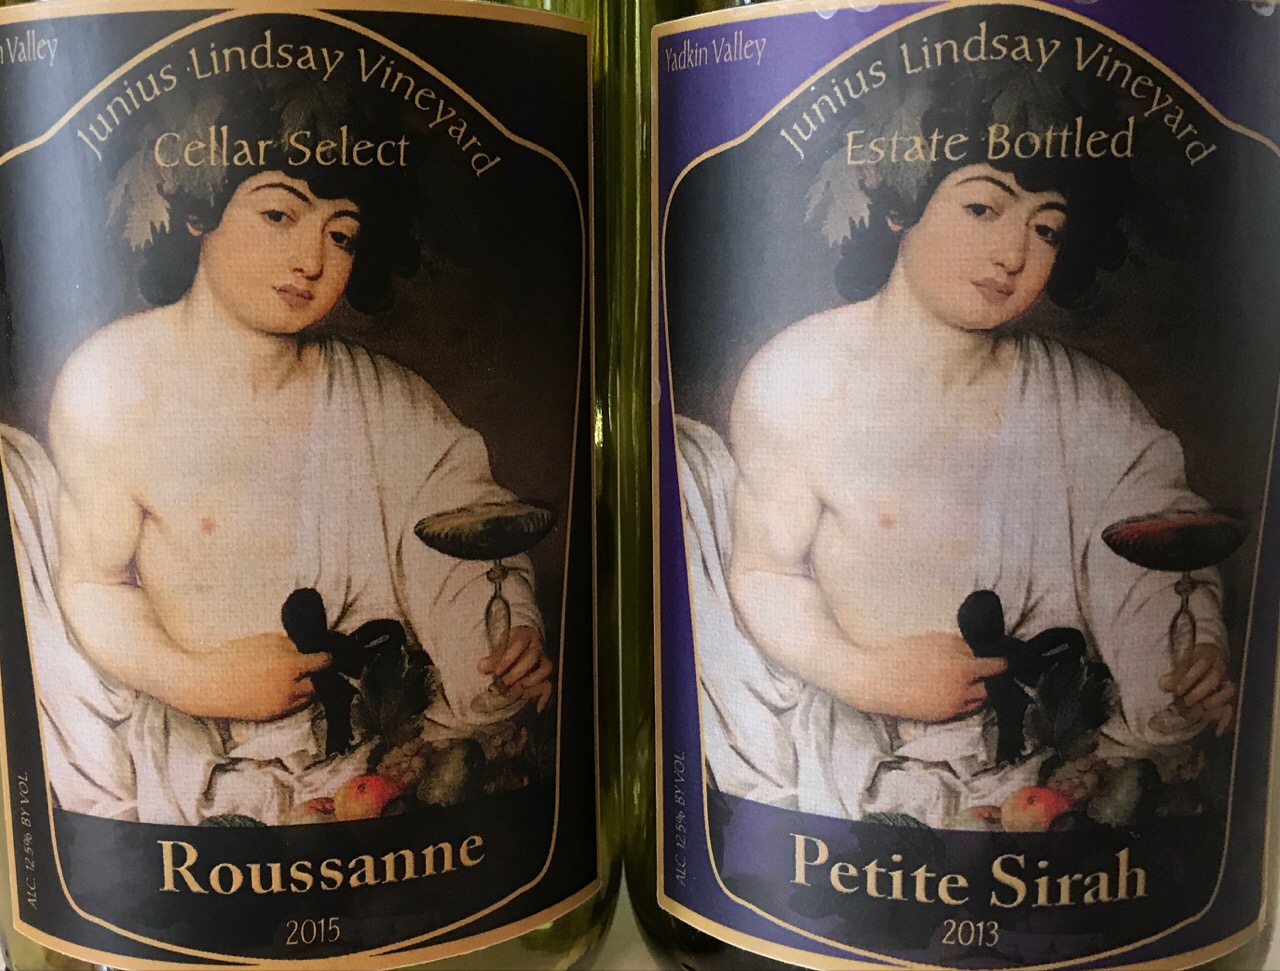 A Spotlight on Roussanne and Petite Sirah